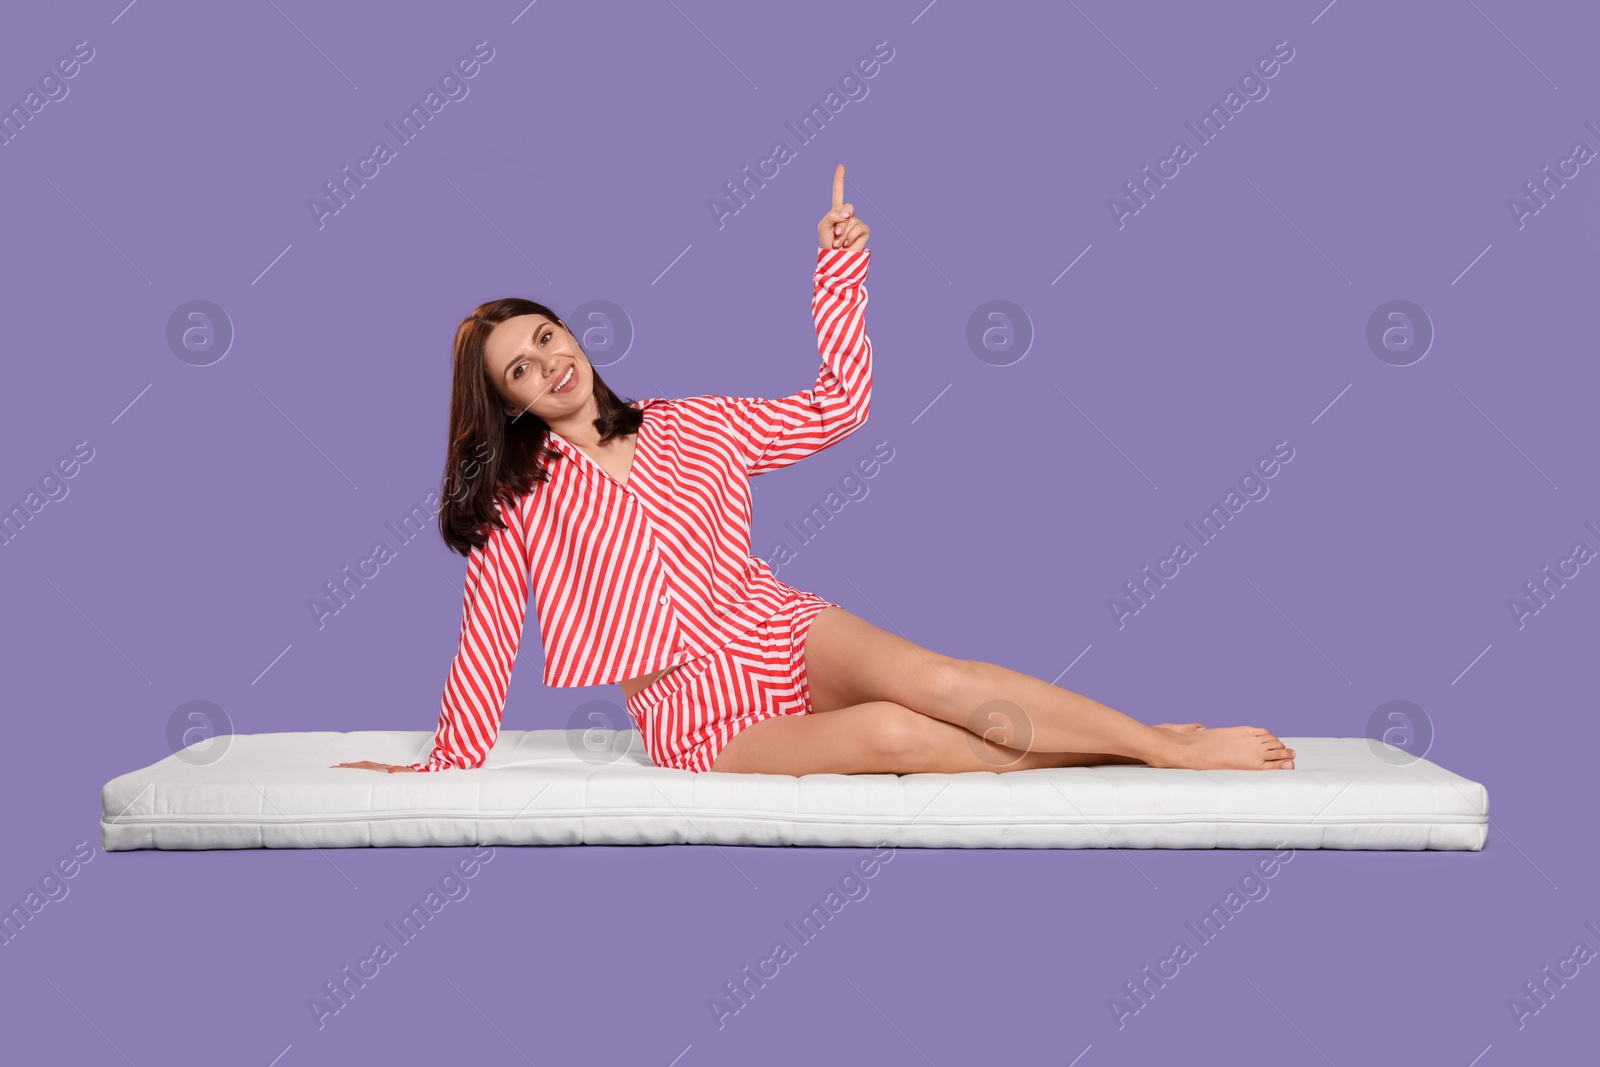 Photo of Young woman sitting on soft mattress and pointing upwards against light purple background